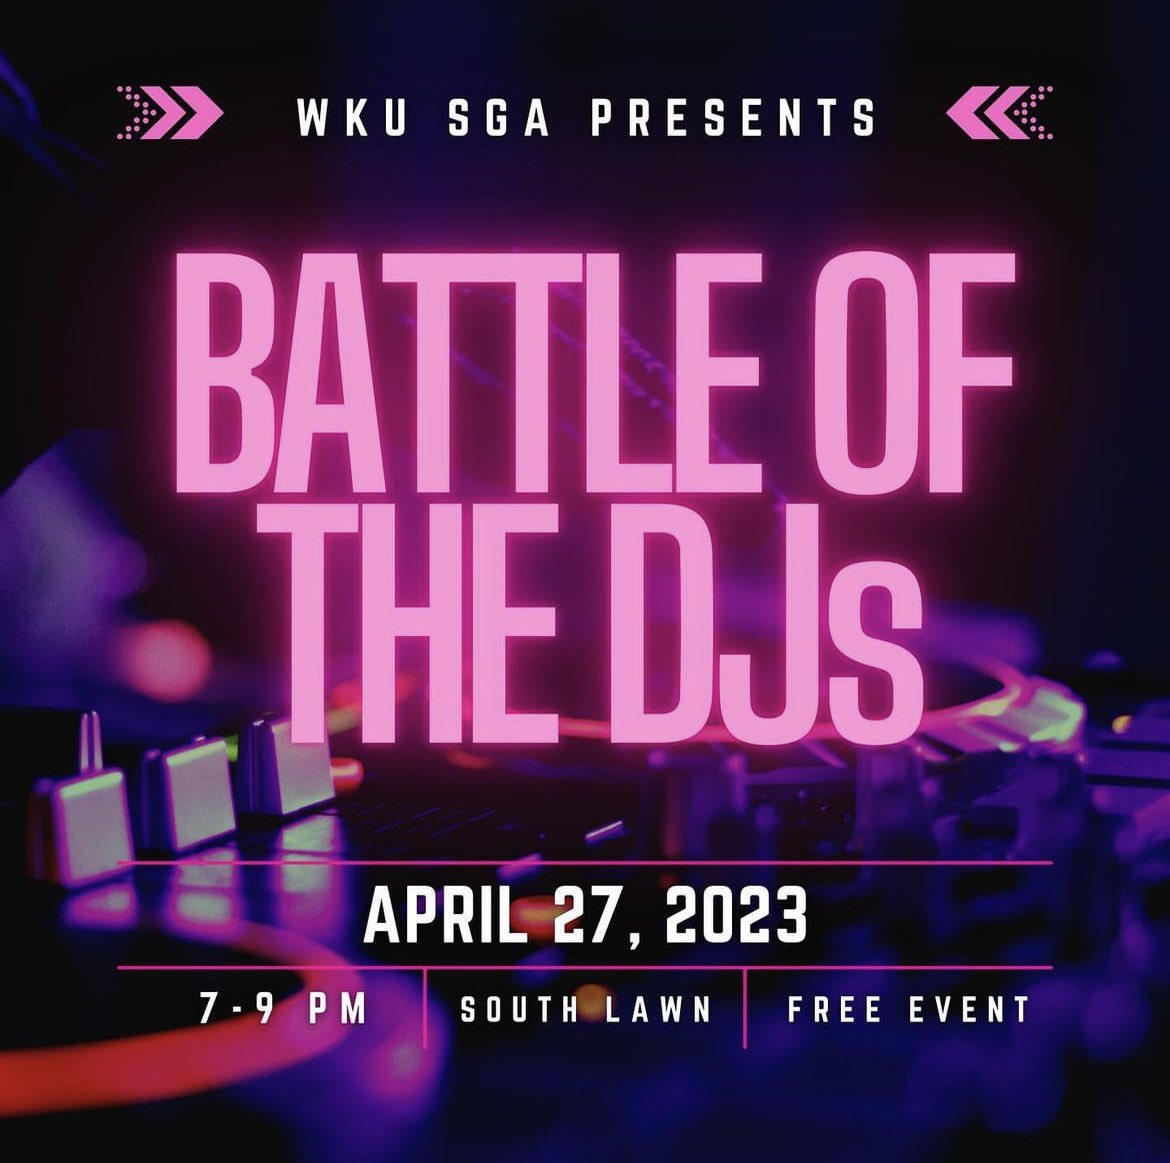 Introduced #MonthlyReport recaps that show what bills/legislation our senators have passed and what new initiatives tackled. Hosted an interactive Battle of the DJs battle where DJs submitted their hype videos, and students voted for who moved on to the finale live concert.